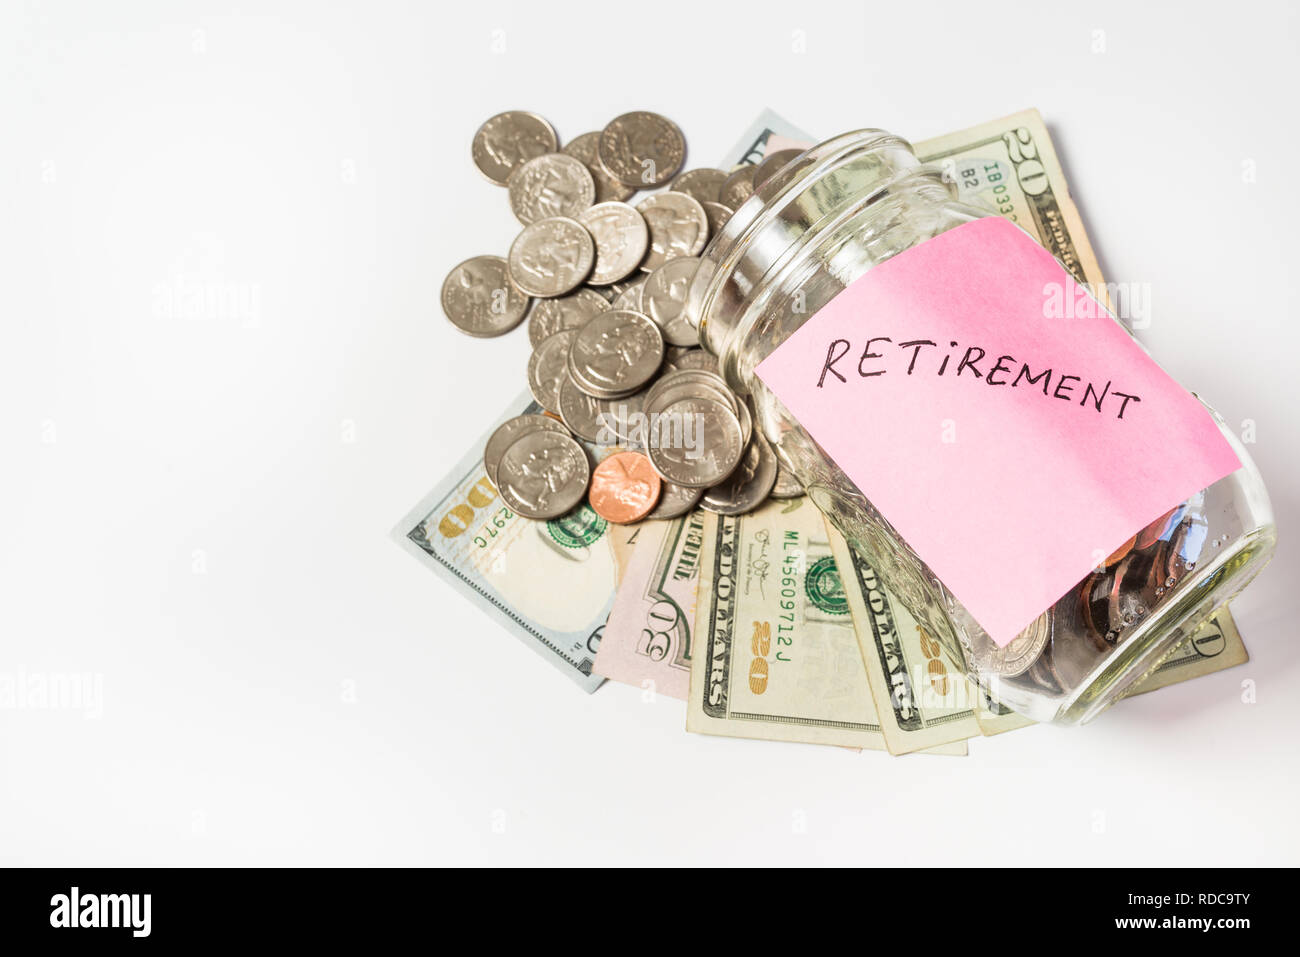 Retirement concept with a jar of money Stock Photo